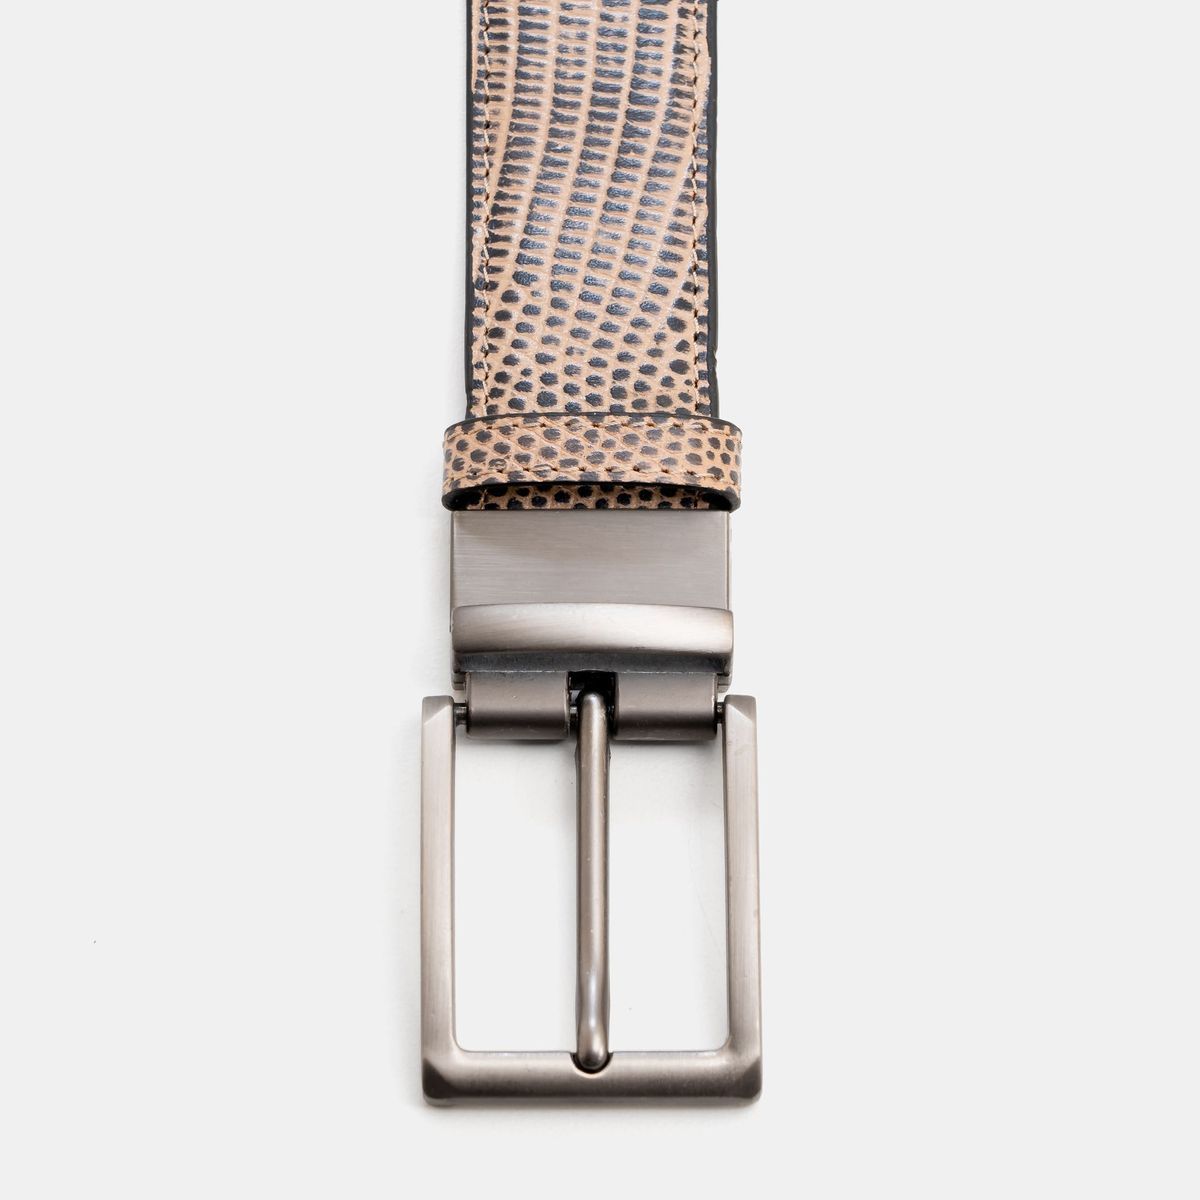 Textured Belt with Matte Buckle Image